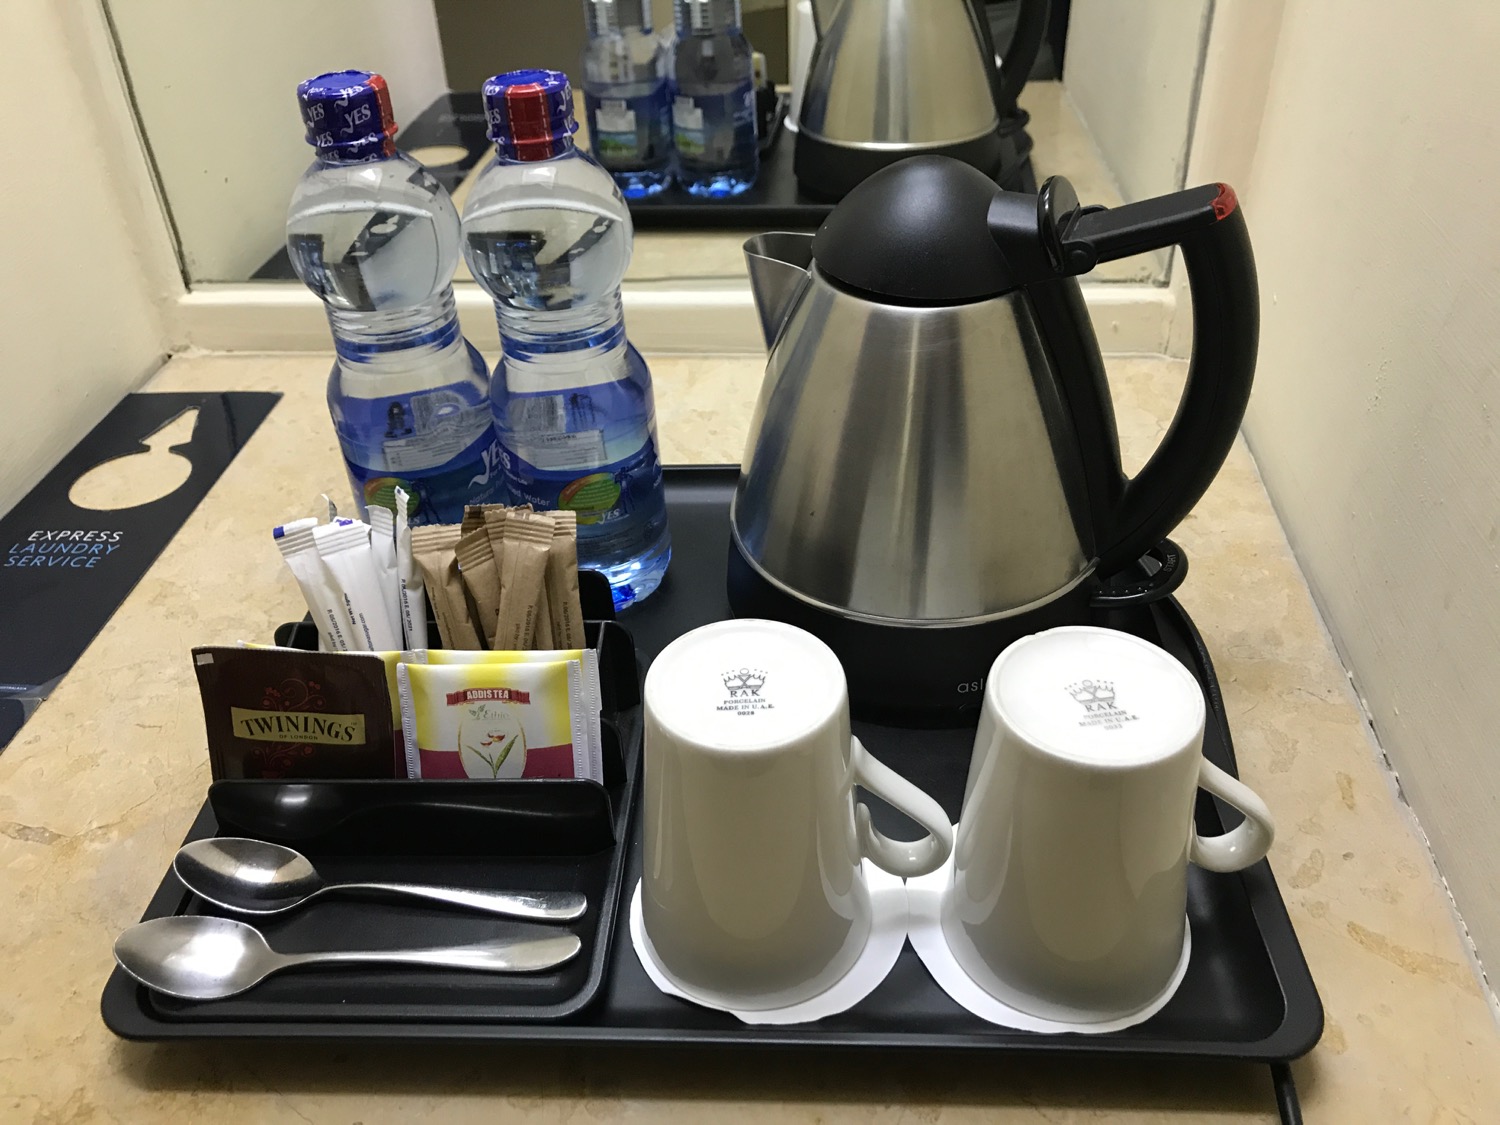 a tray with coffee pot and cups on it